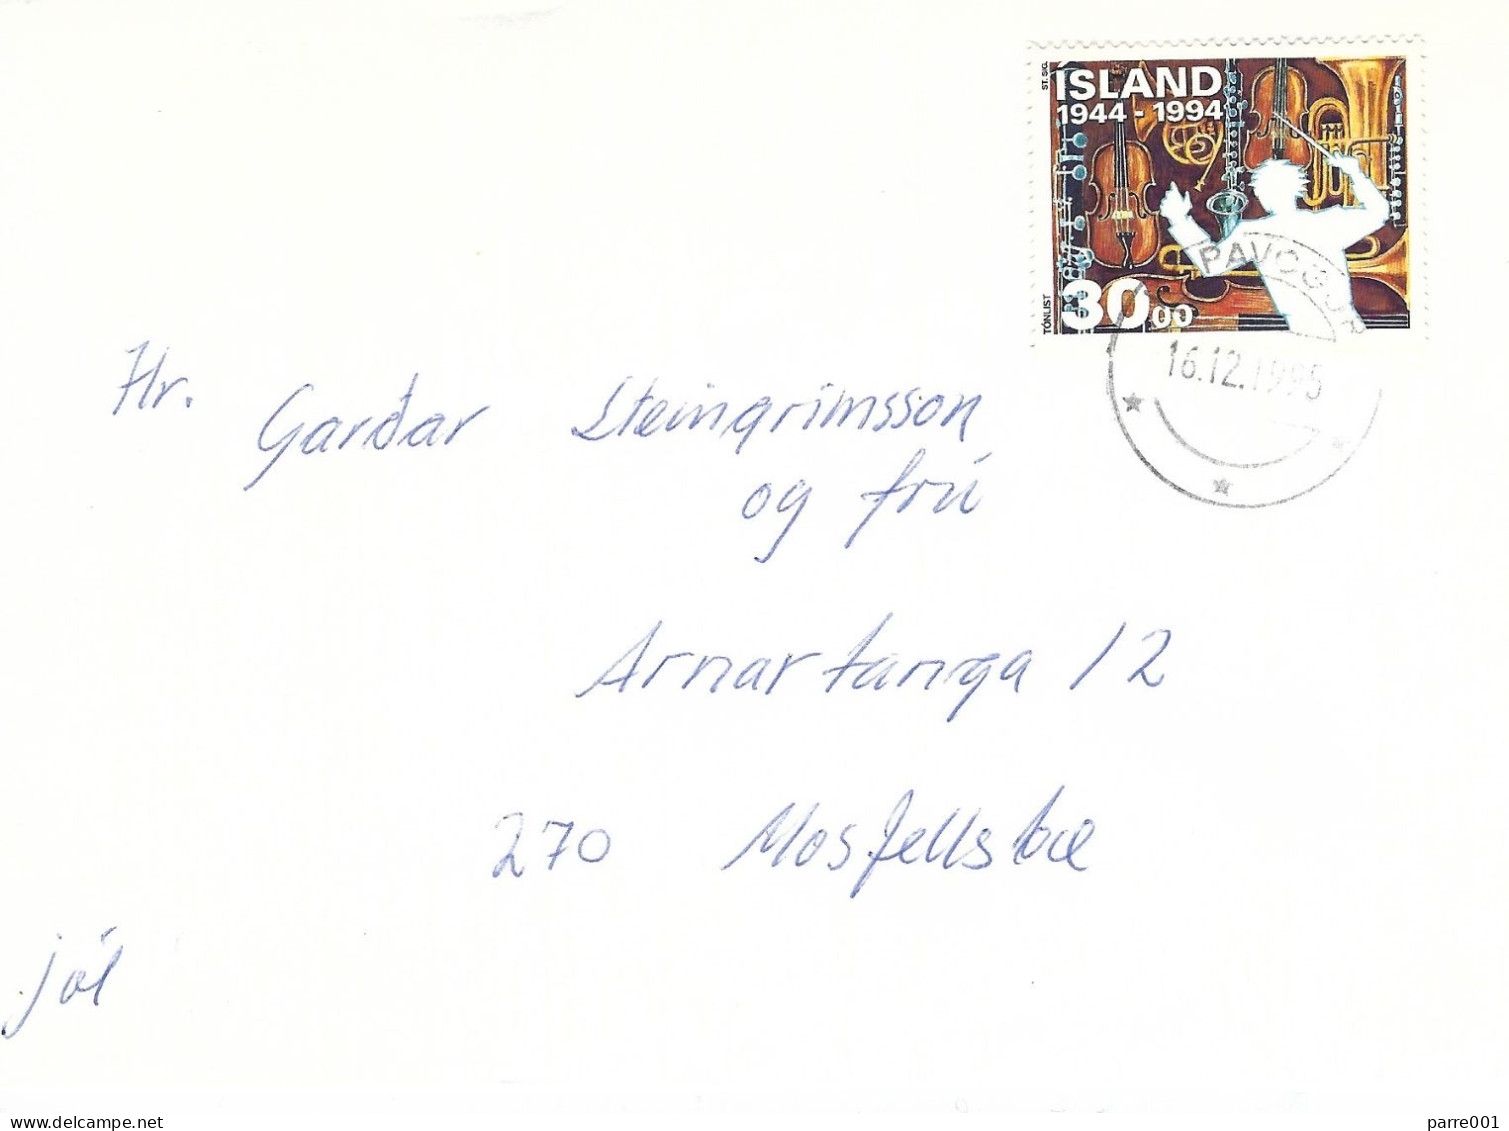 Iceland Island 1995 Kópavogur Music Art Culture Domestic Cover - Covers & Documents